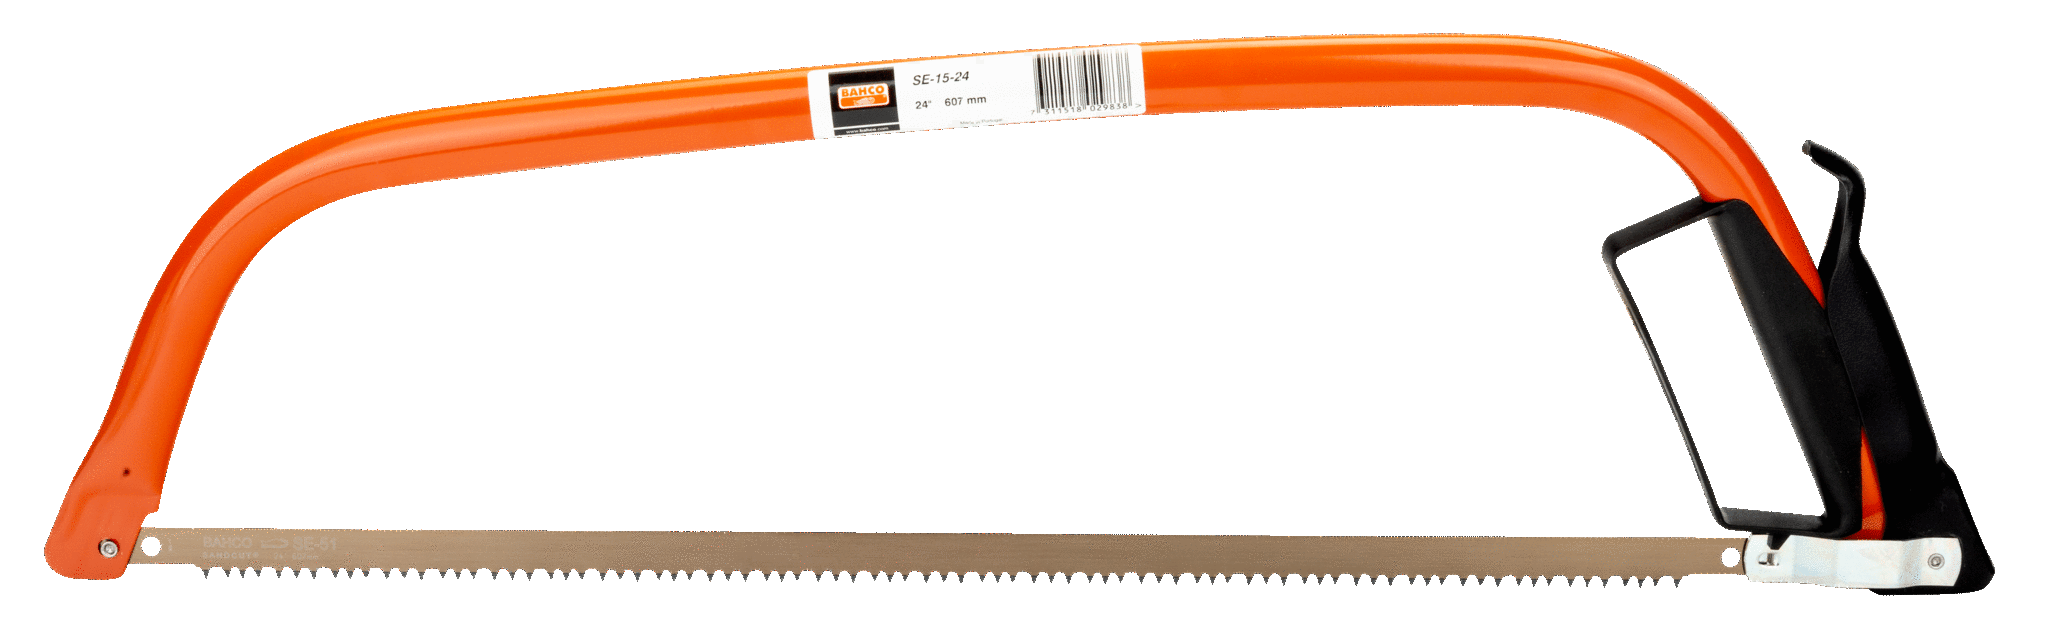 General Purpose Bow Saws 21" - SE-16-21 by Bahco